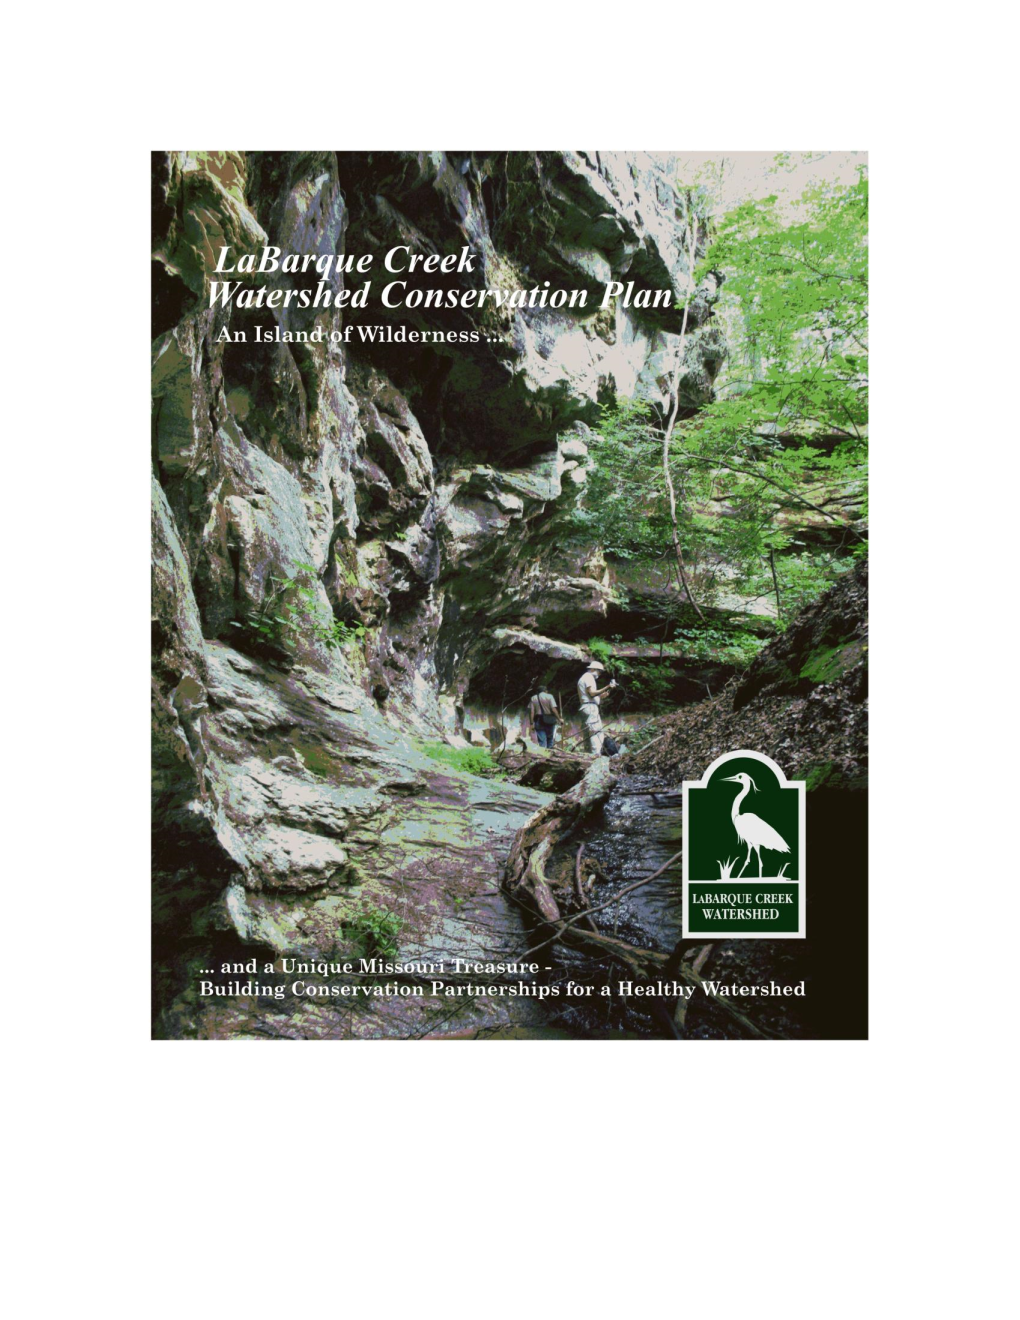 Labarque Creek Watershed Conservation Plan and Pledge Our Support for Its Contents and Implementation